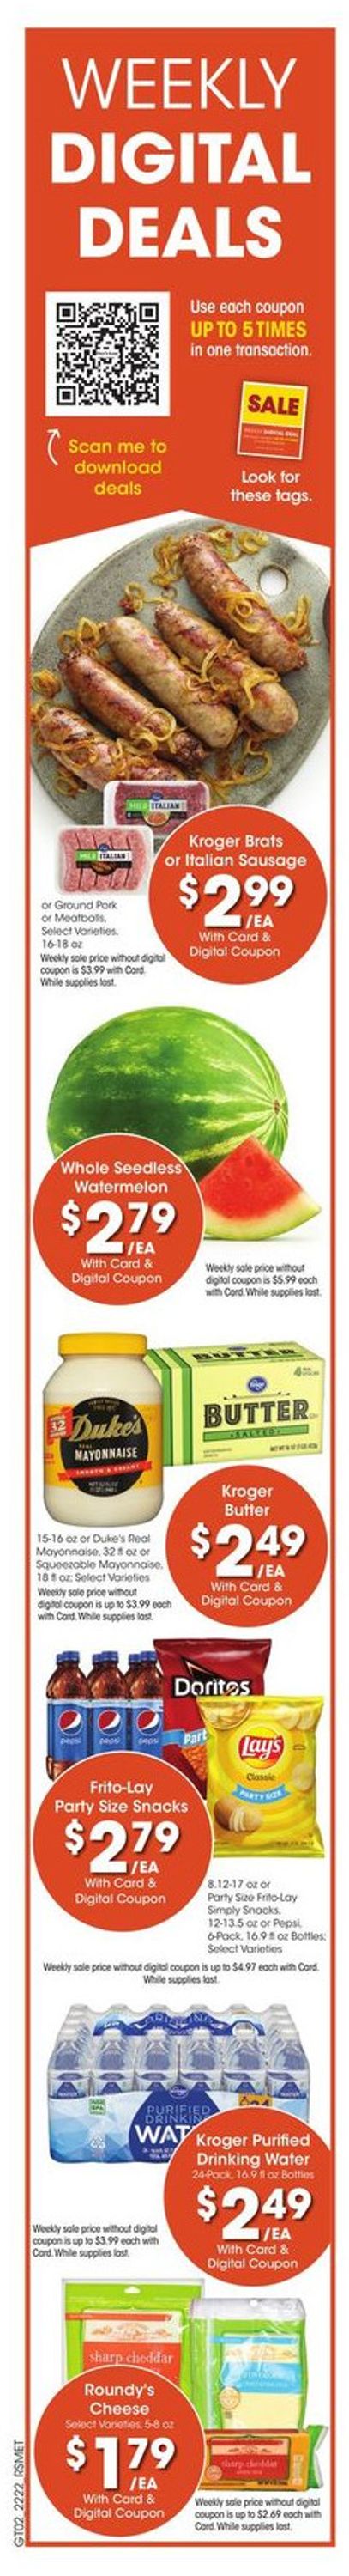 Catalogue Pick ‘n Save from 06/29/2022